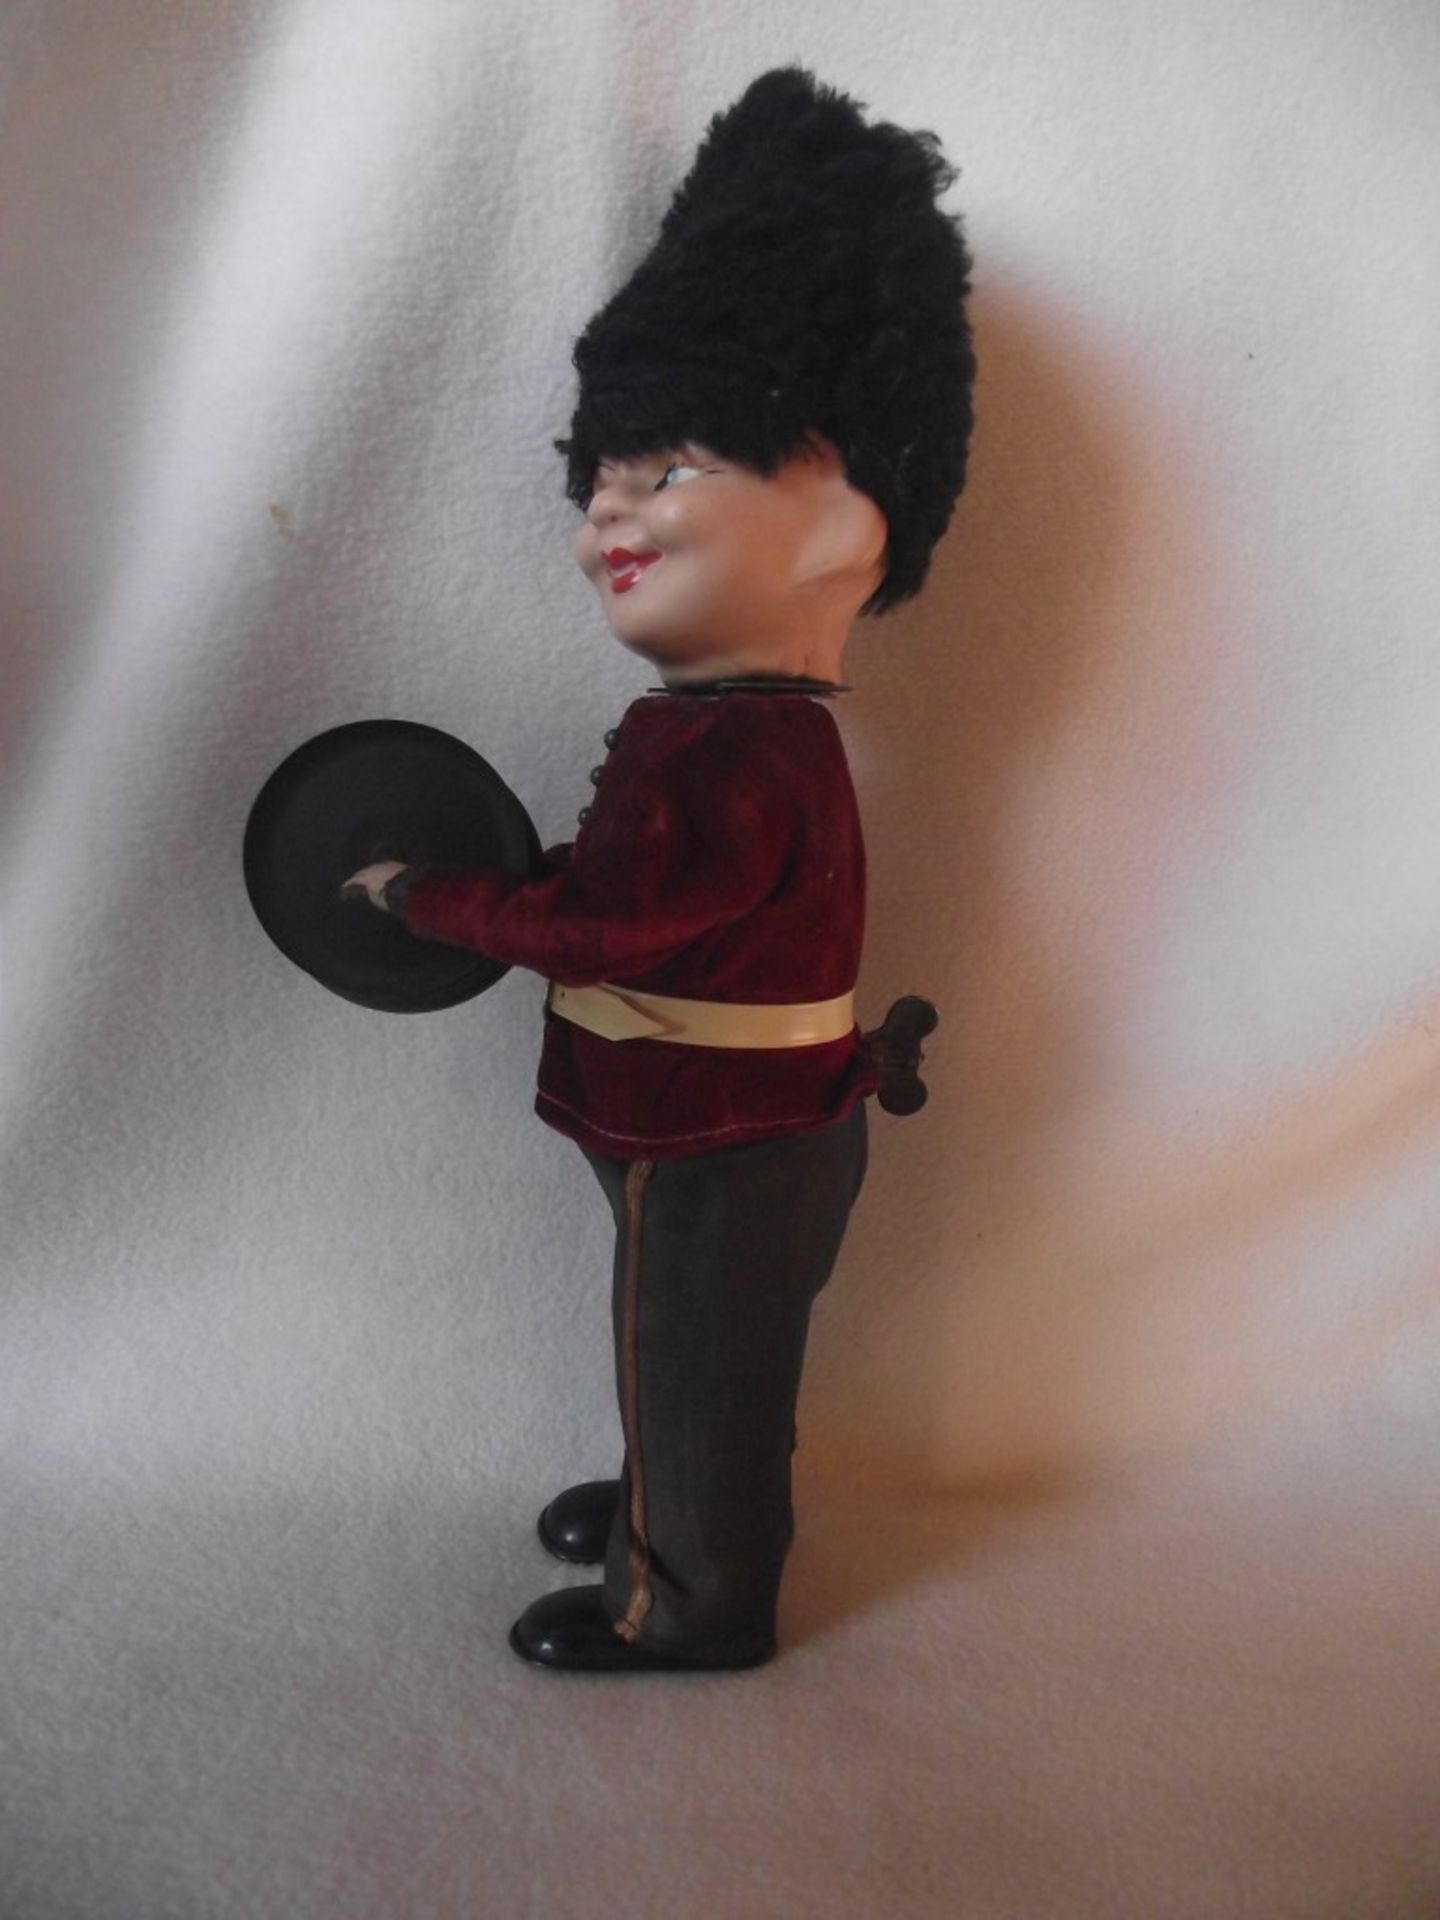 Vintage Clockwork Guardsman Playing Cymbals - Moving Bisque Head -1950's-1960's - Image 4 of 23